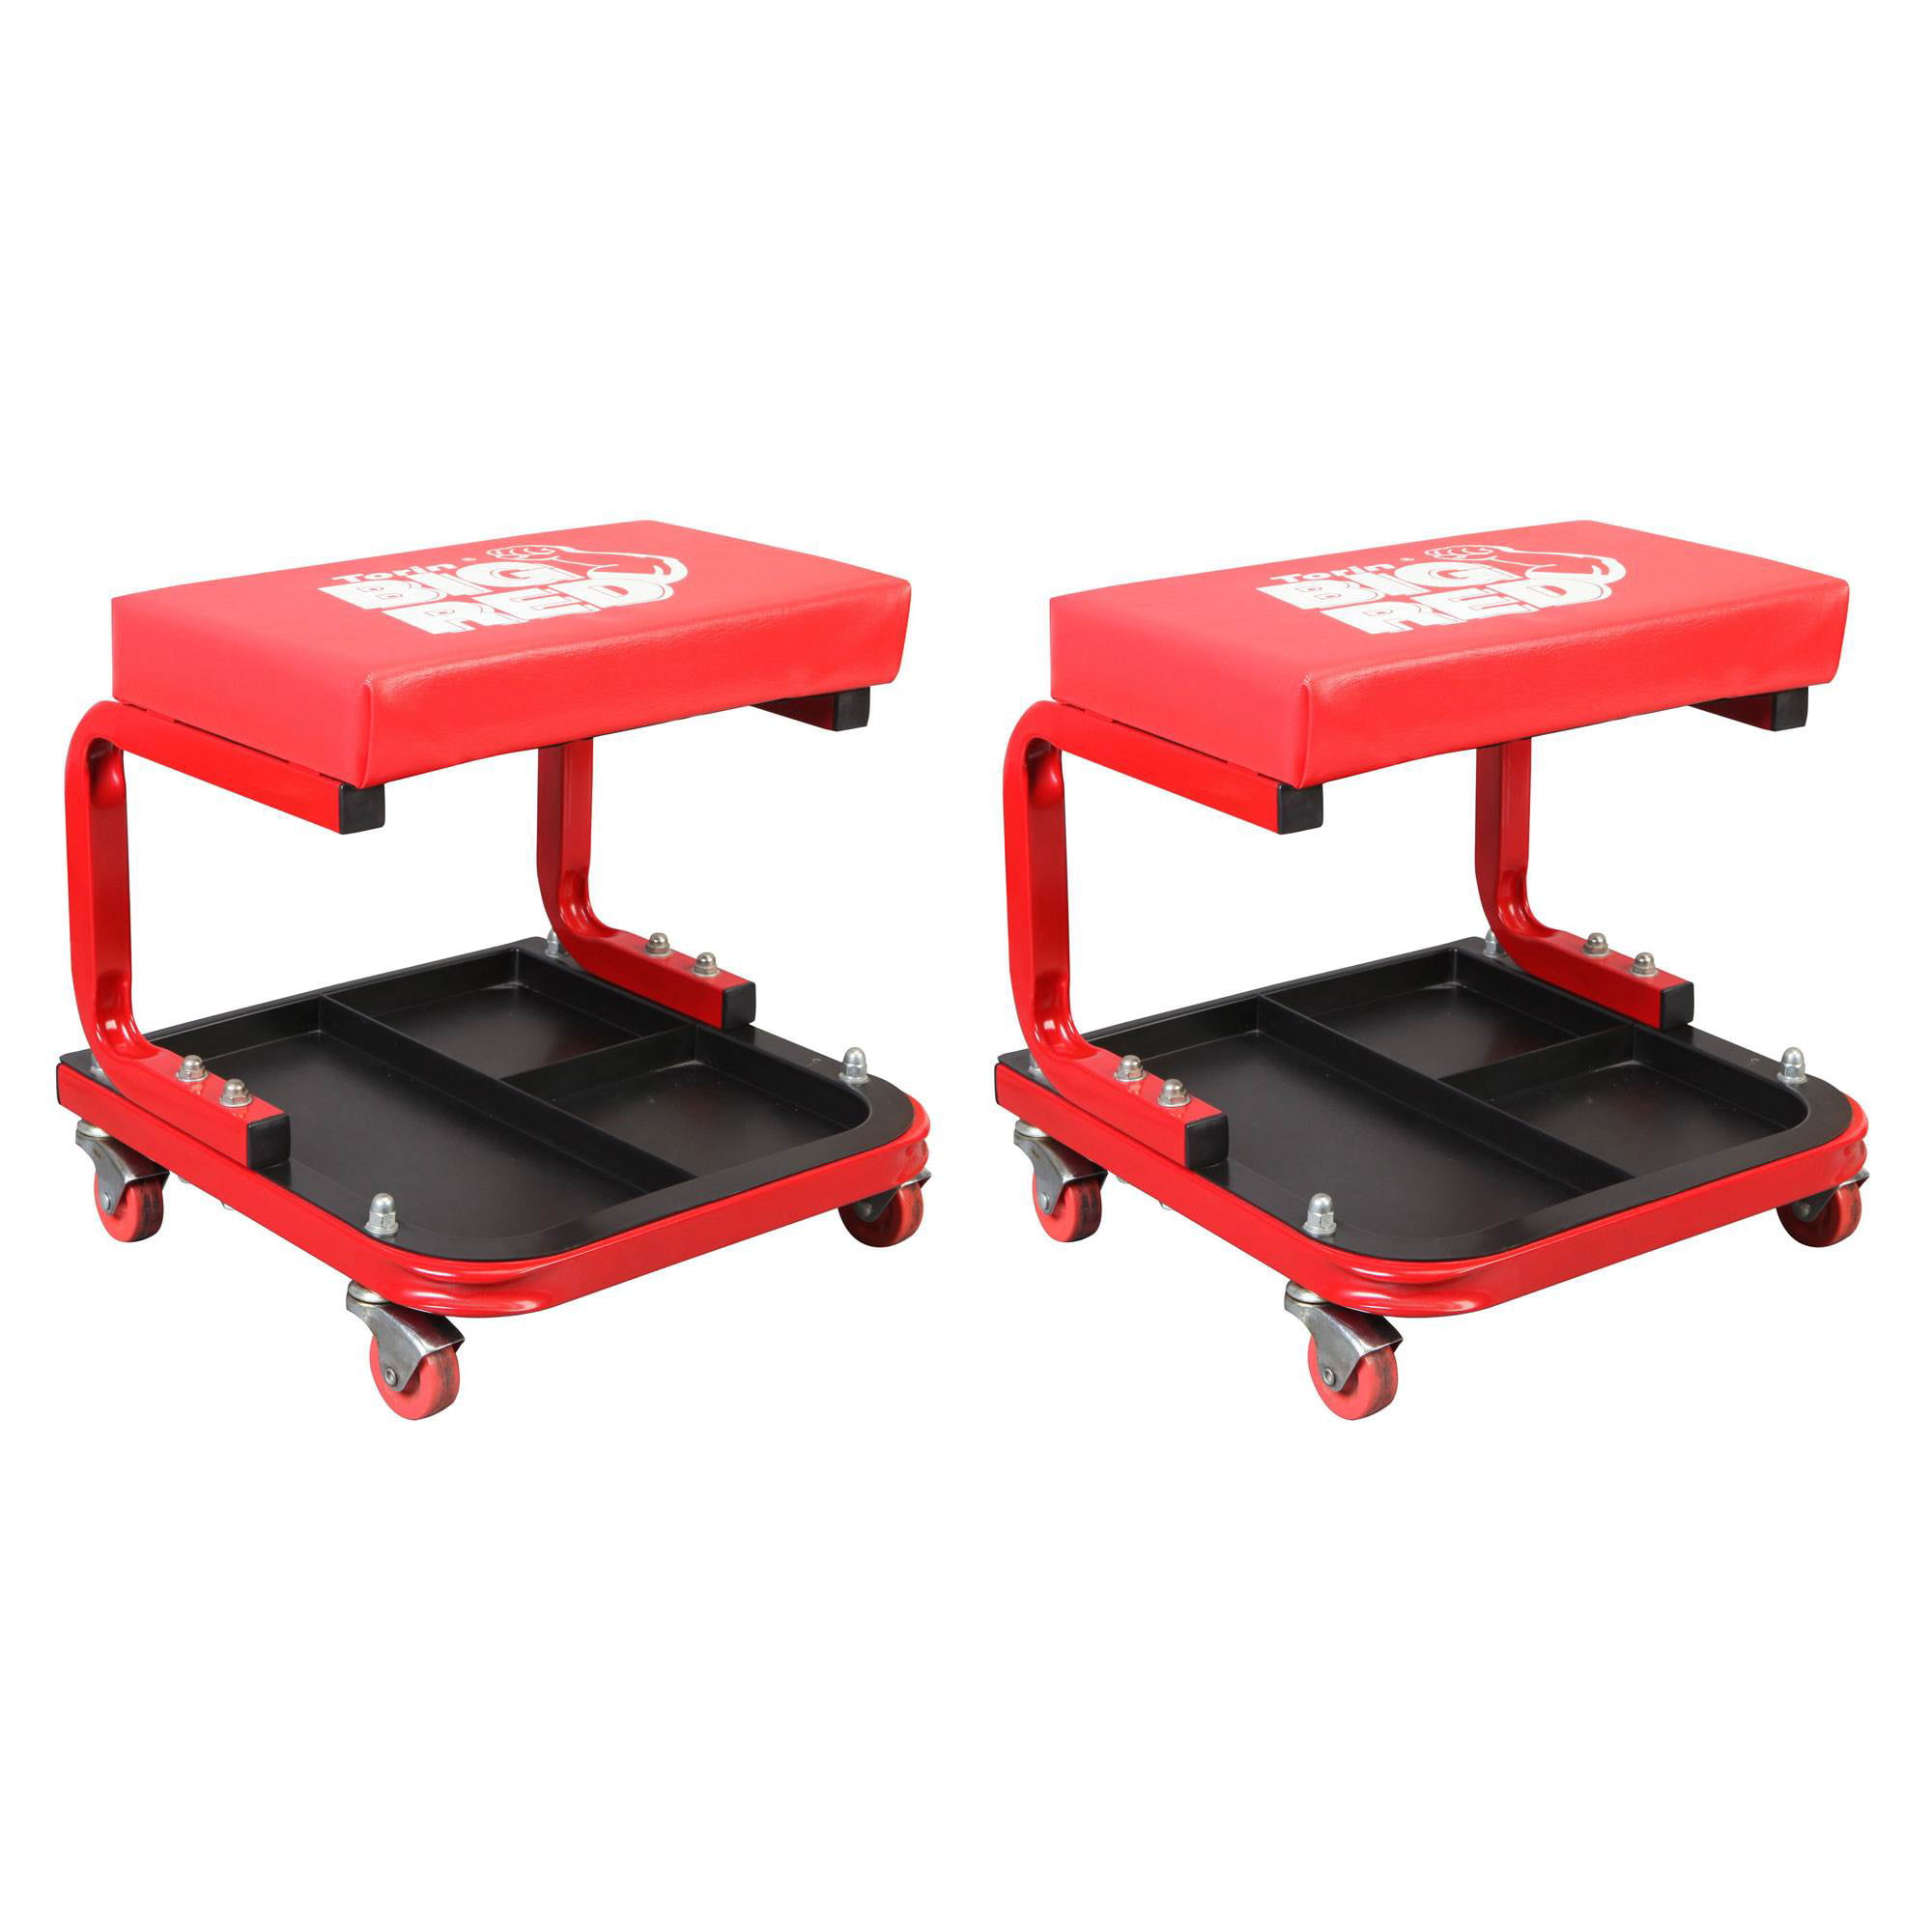 Torin Rolling Creeper Padded Mechanic Stool Tool Tray Red 2 Pack 